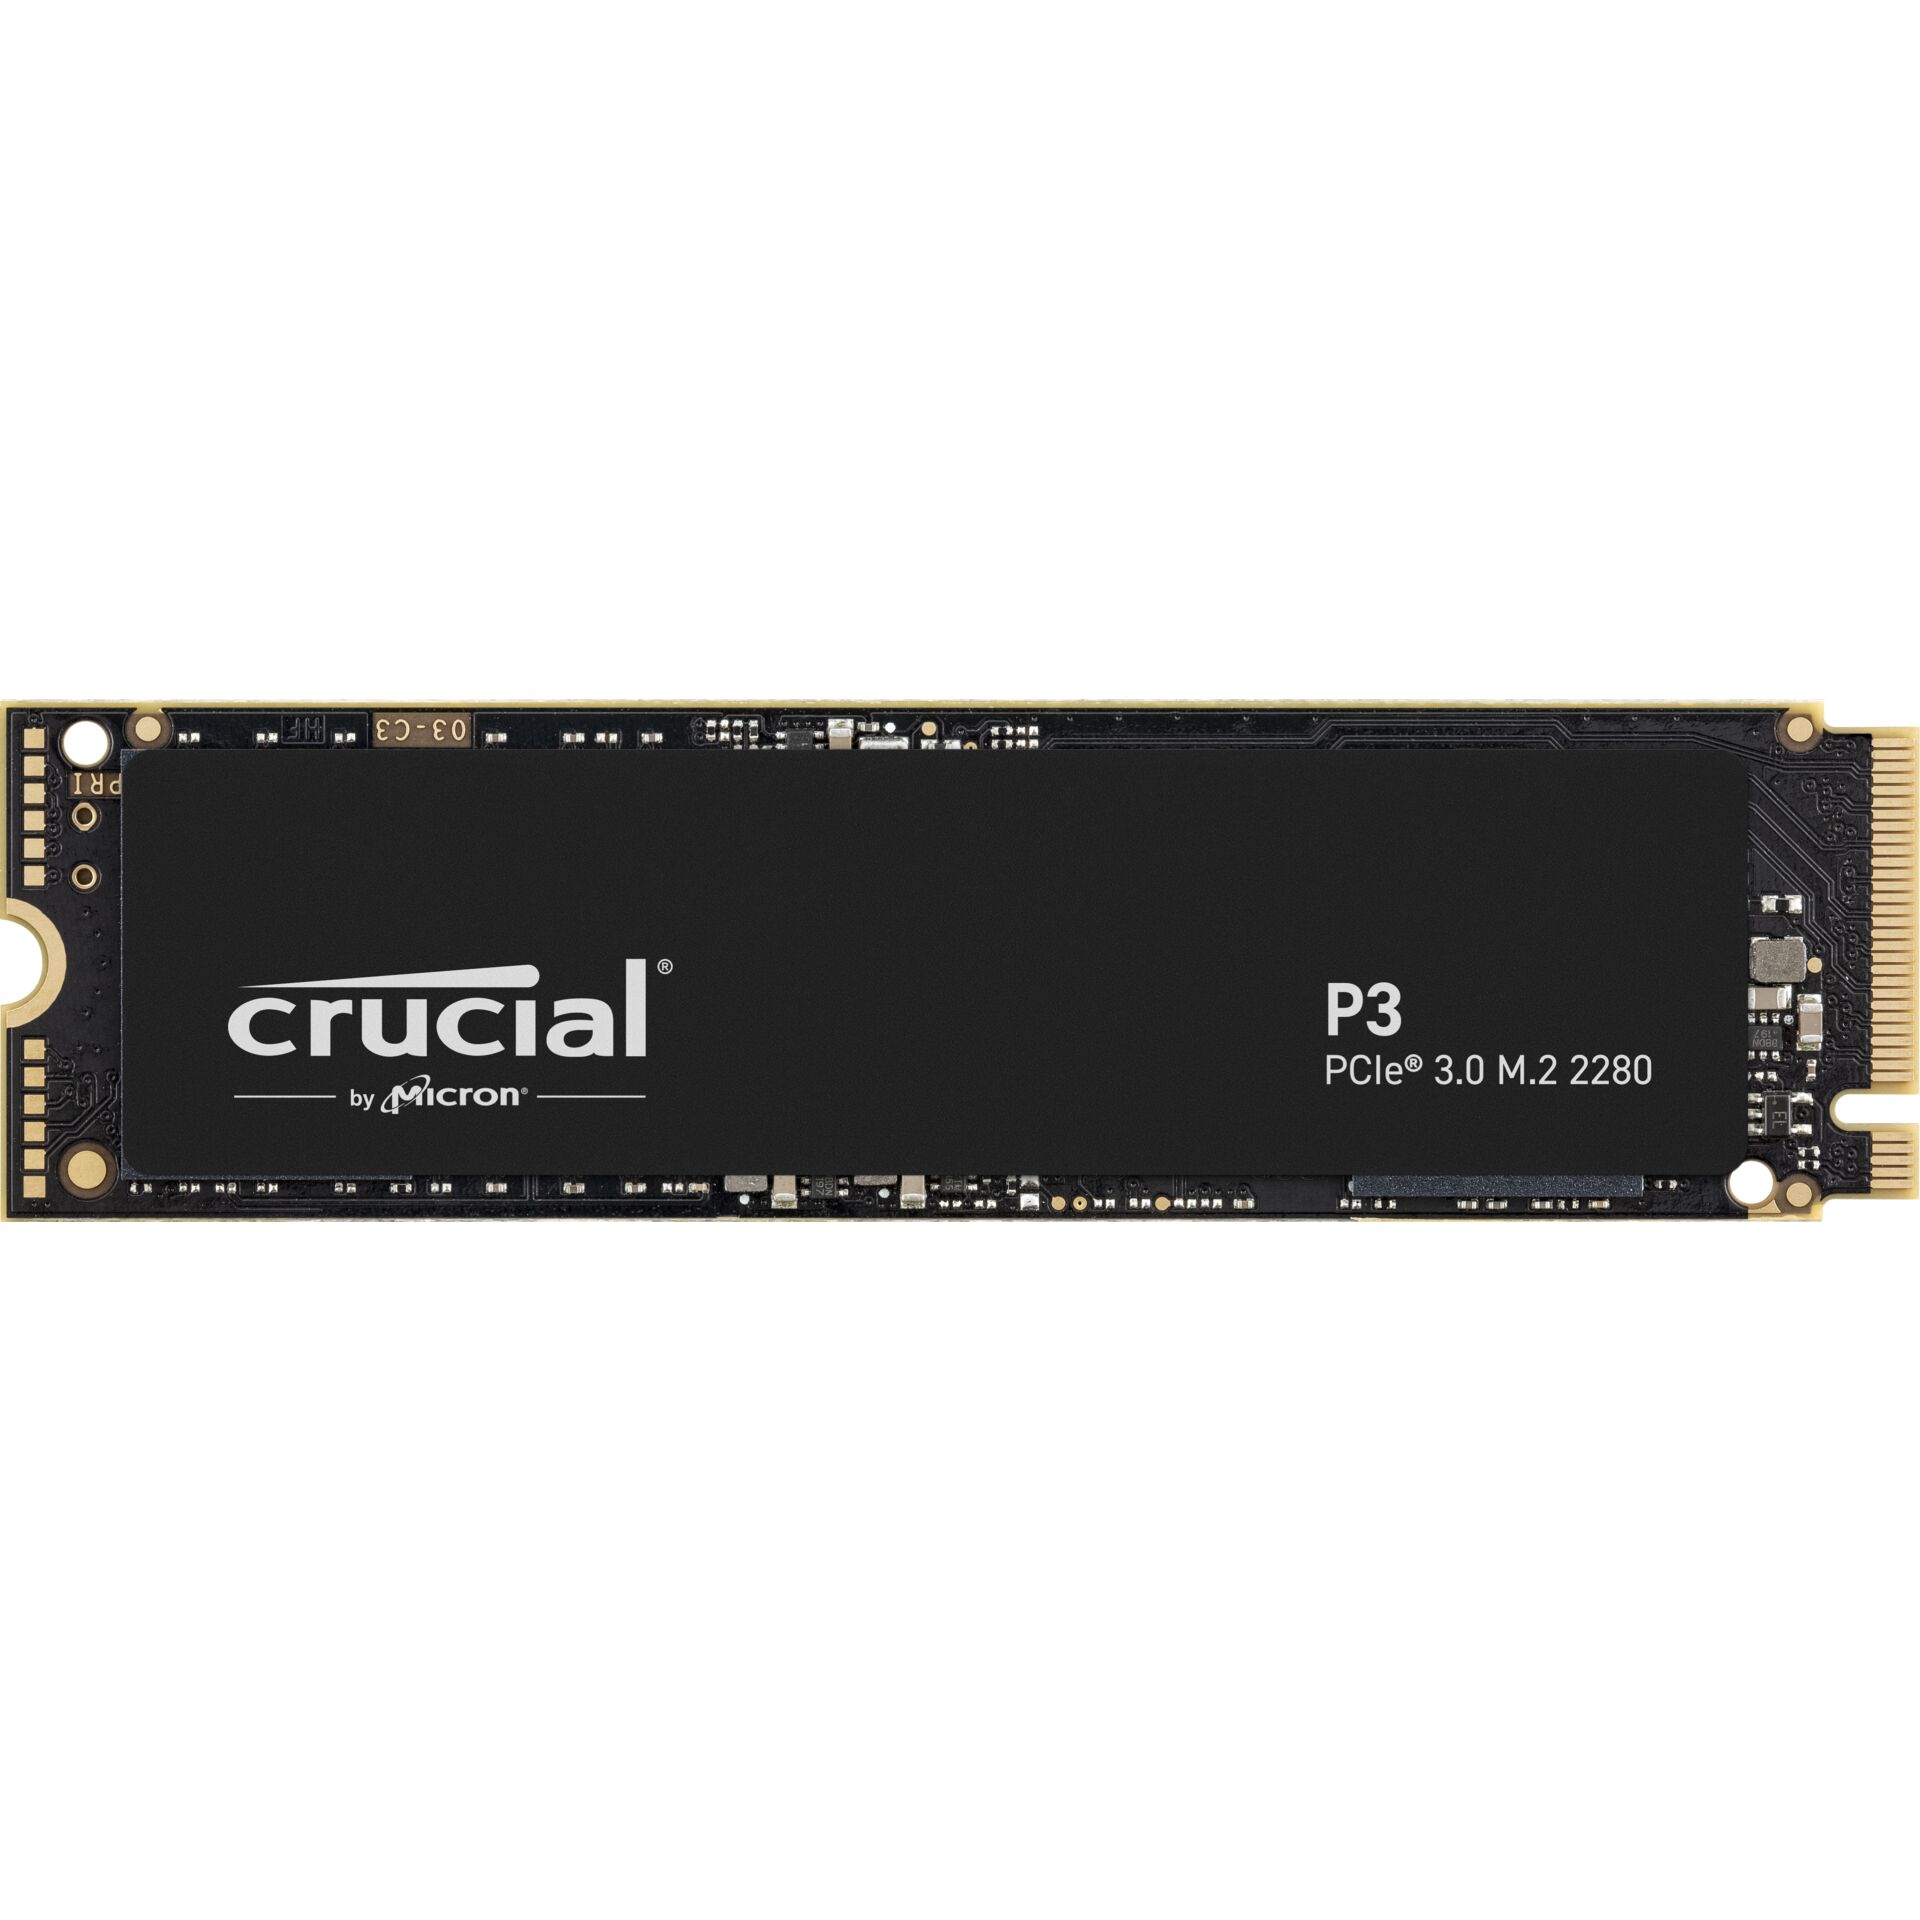 2.0 TB SSD Crucial P3 SSD, M.2/M-Key (PCIe 3.0 x4), lesen: 3500MB/s, schreiben: 3000MB/s SLC-Cached, TBW: 440TB